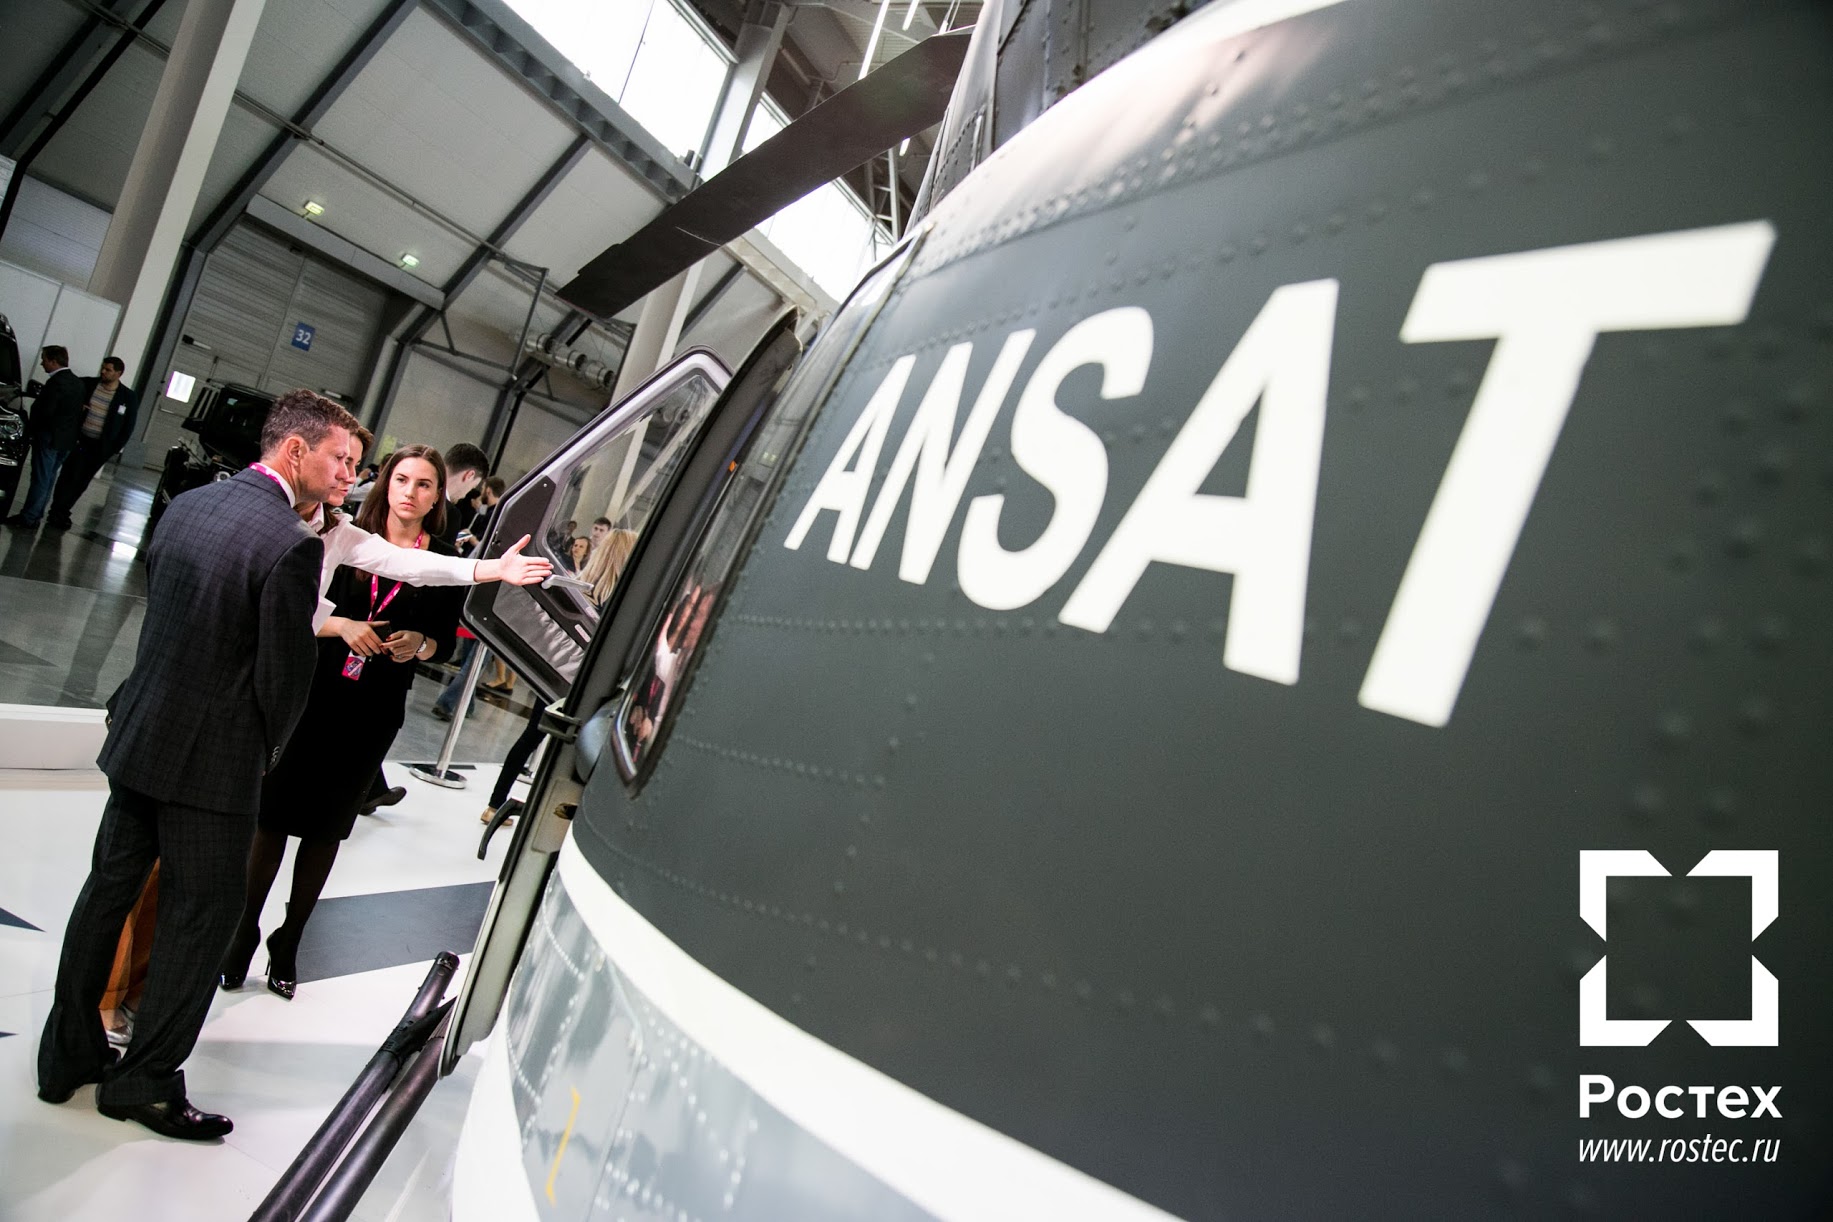 Russian Helicopters Demonstrated Ansat to Pakistani Representatives